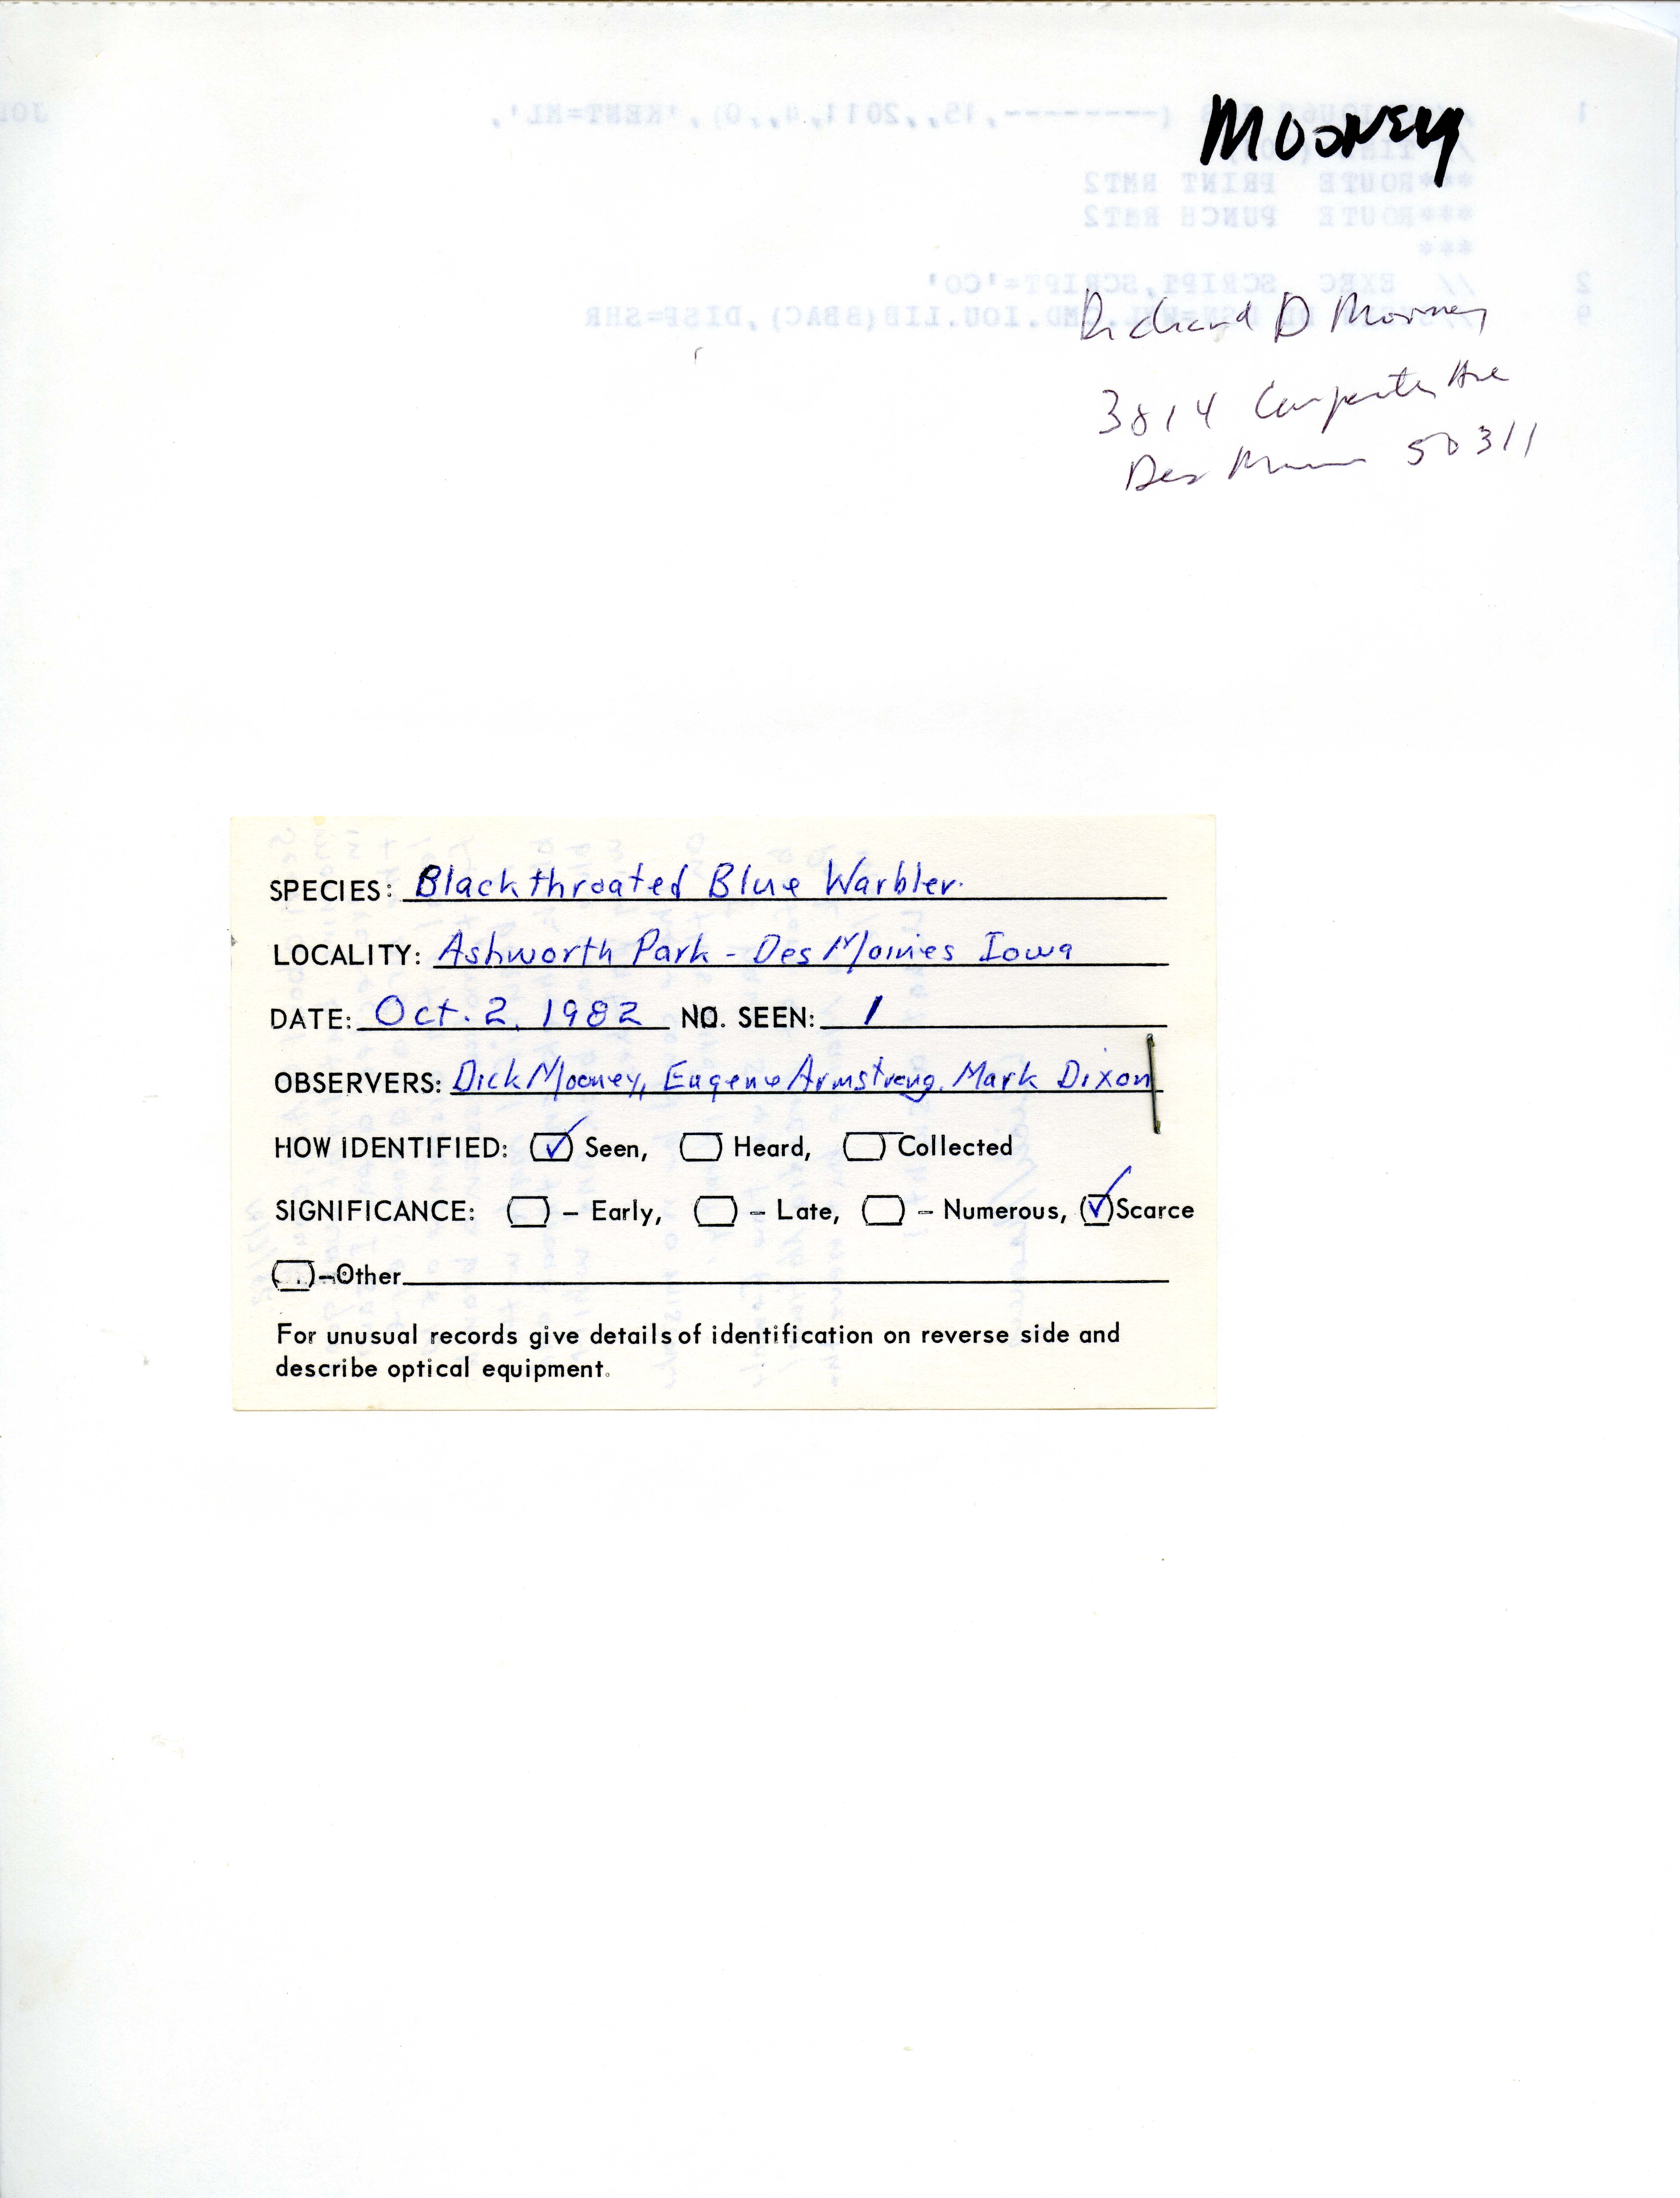 Field notes contributed by Richard Mooney, October 2, 1982